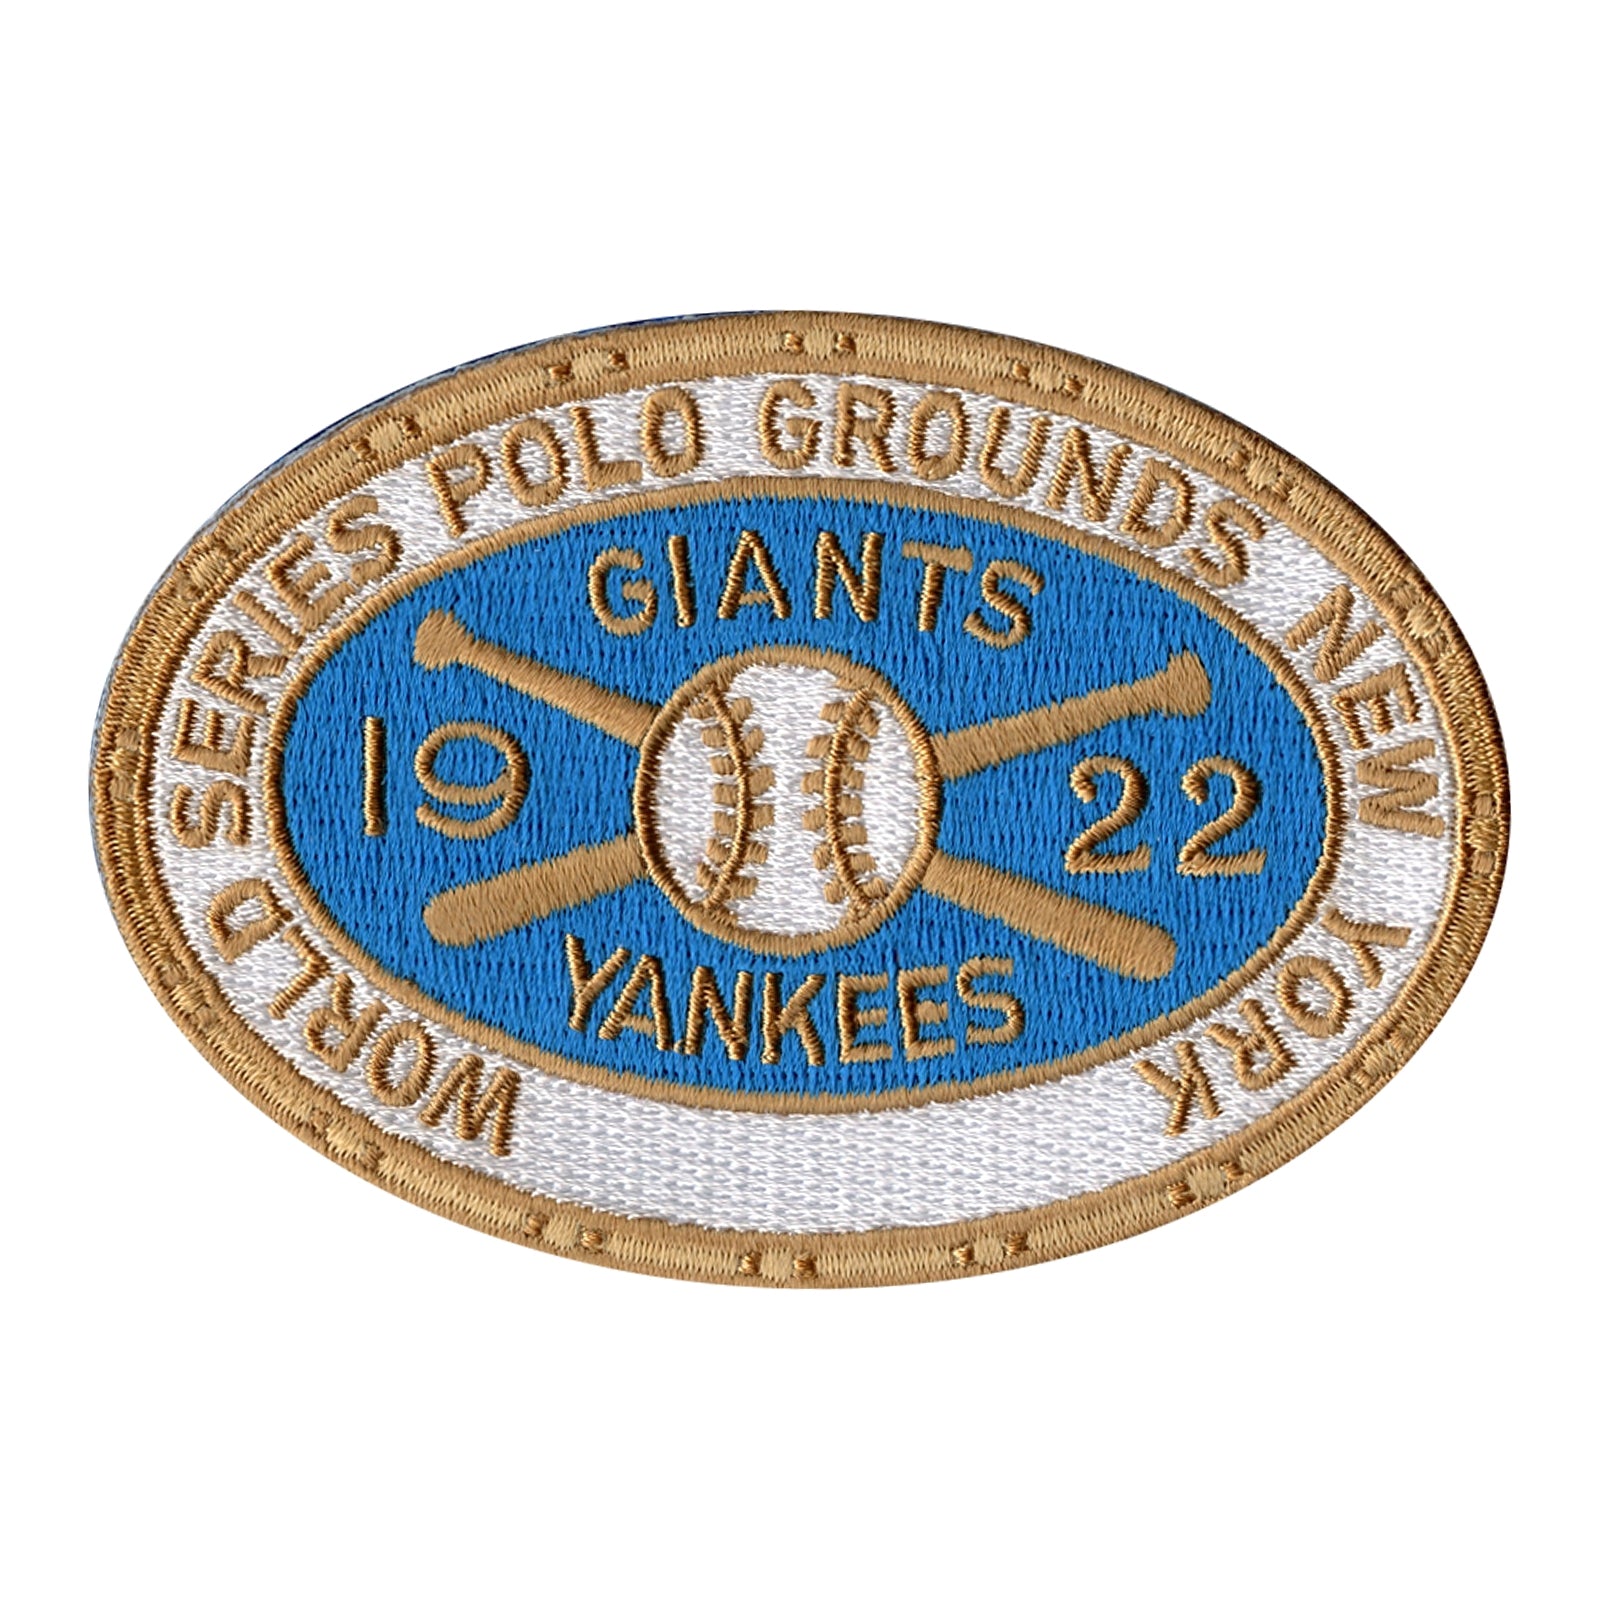 1922 New York Giants Yankees Polo Grounds MLB World Series Jersey Logo Patch 